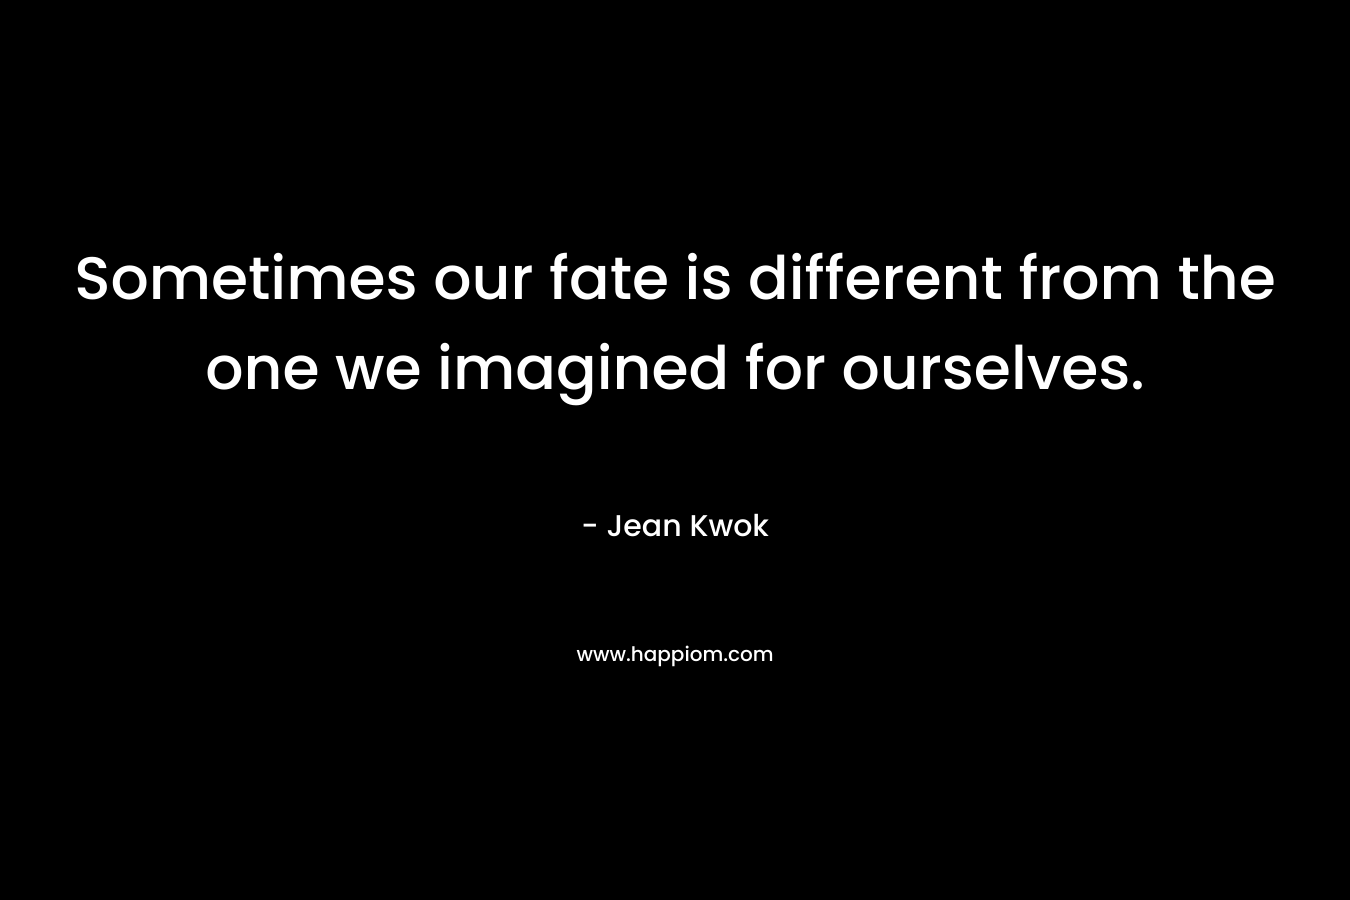 Sometimes our fate is different from the one we imagined for ourselves. – Jean Kwok